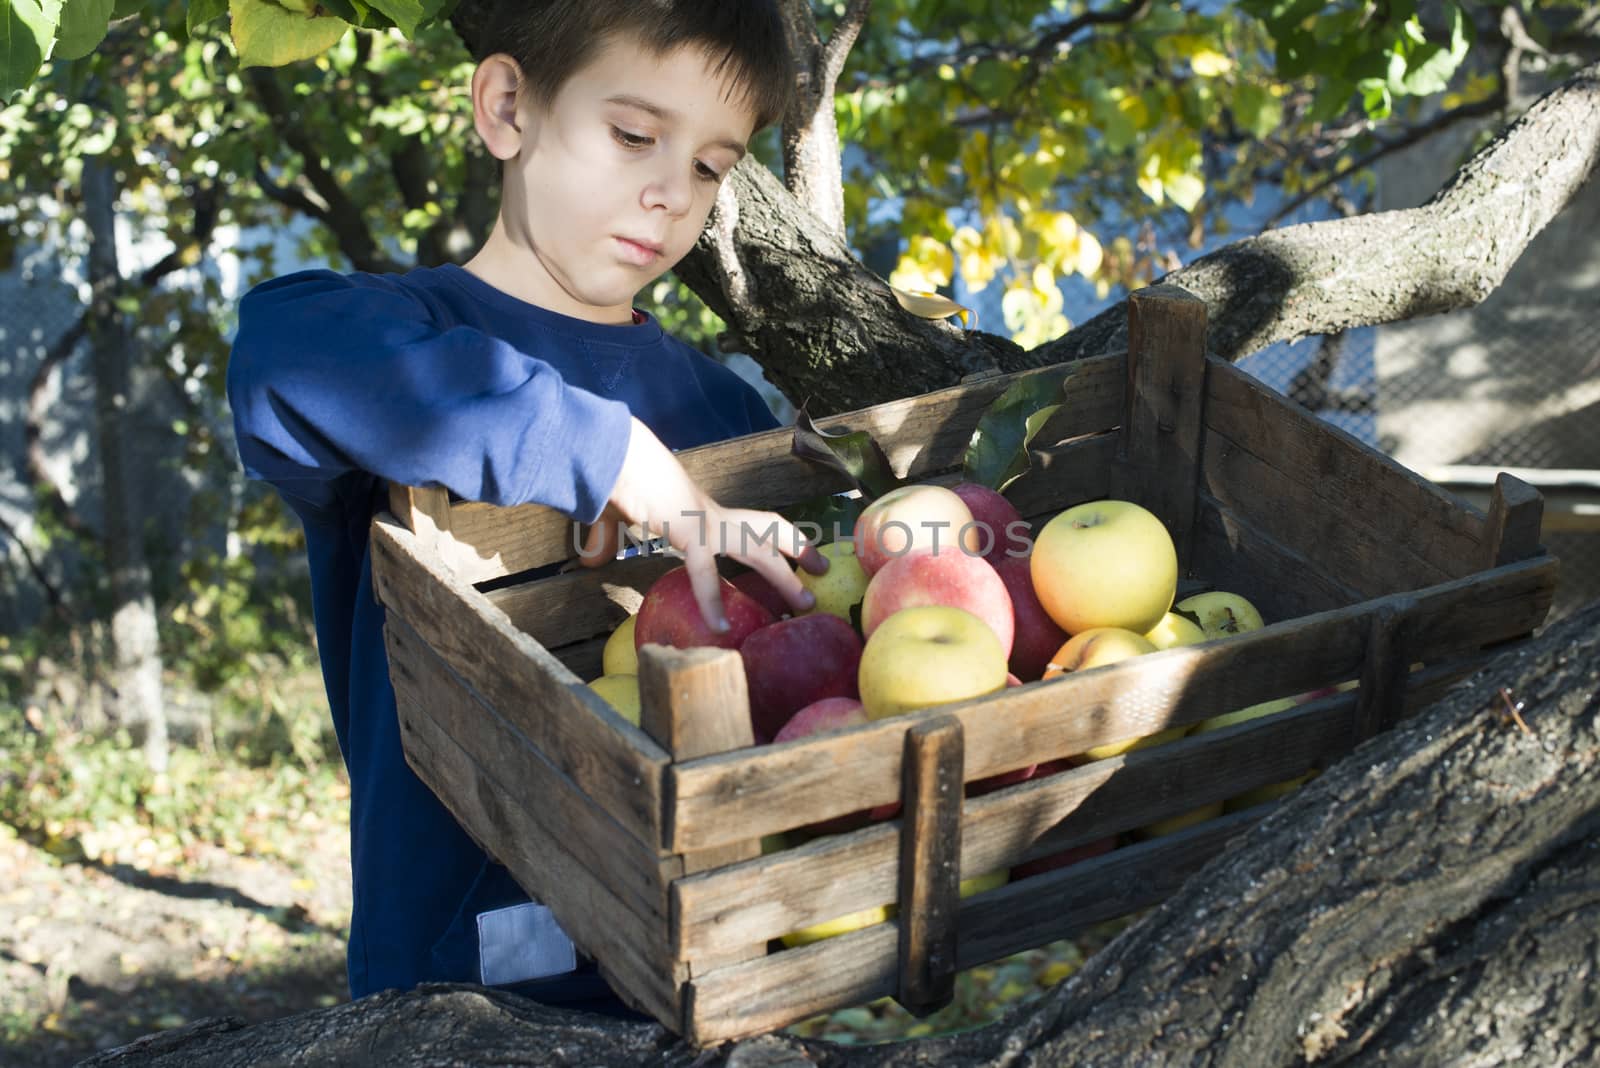 Apples in an old wooden crate on tree. Child authentic image